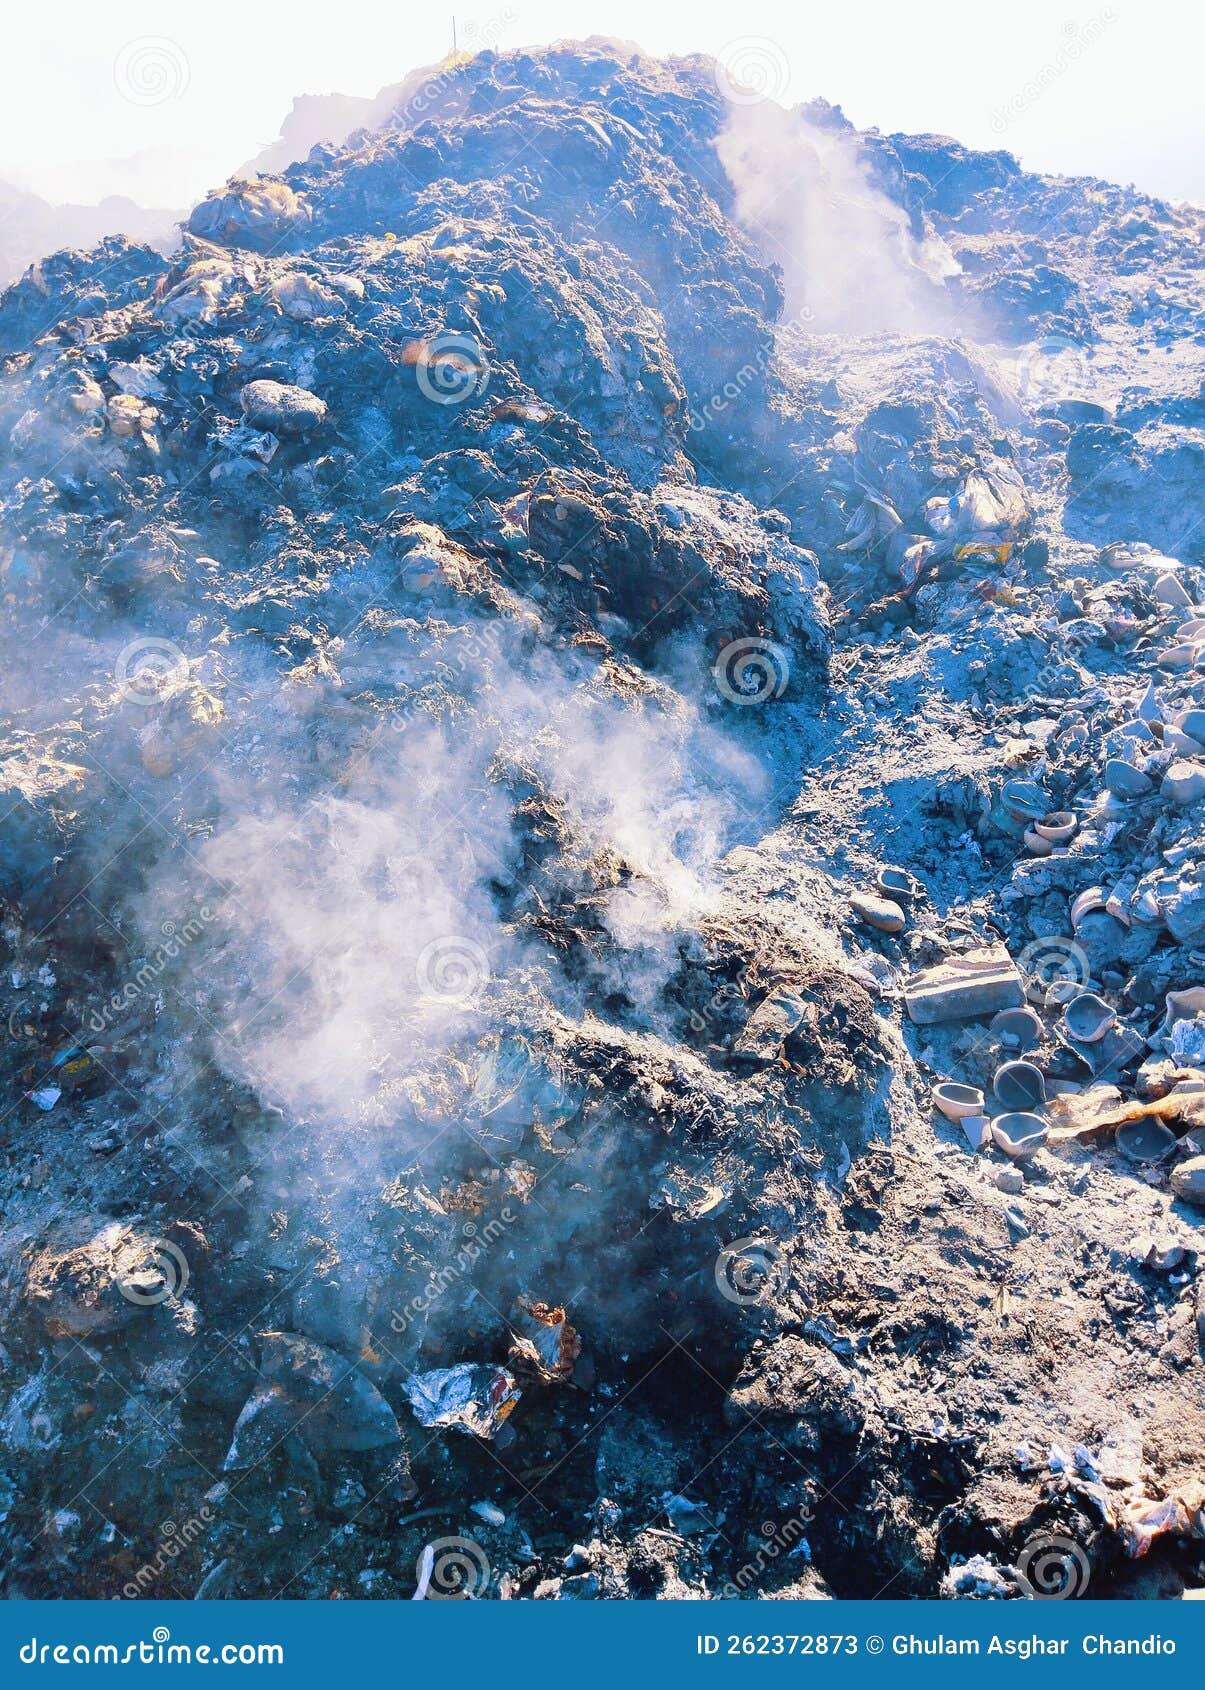 garbage heap burnt waste pile on fire trash smoke rubbish burning ashes air pollution dump litter  image photo